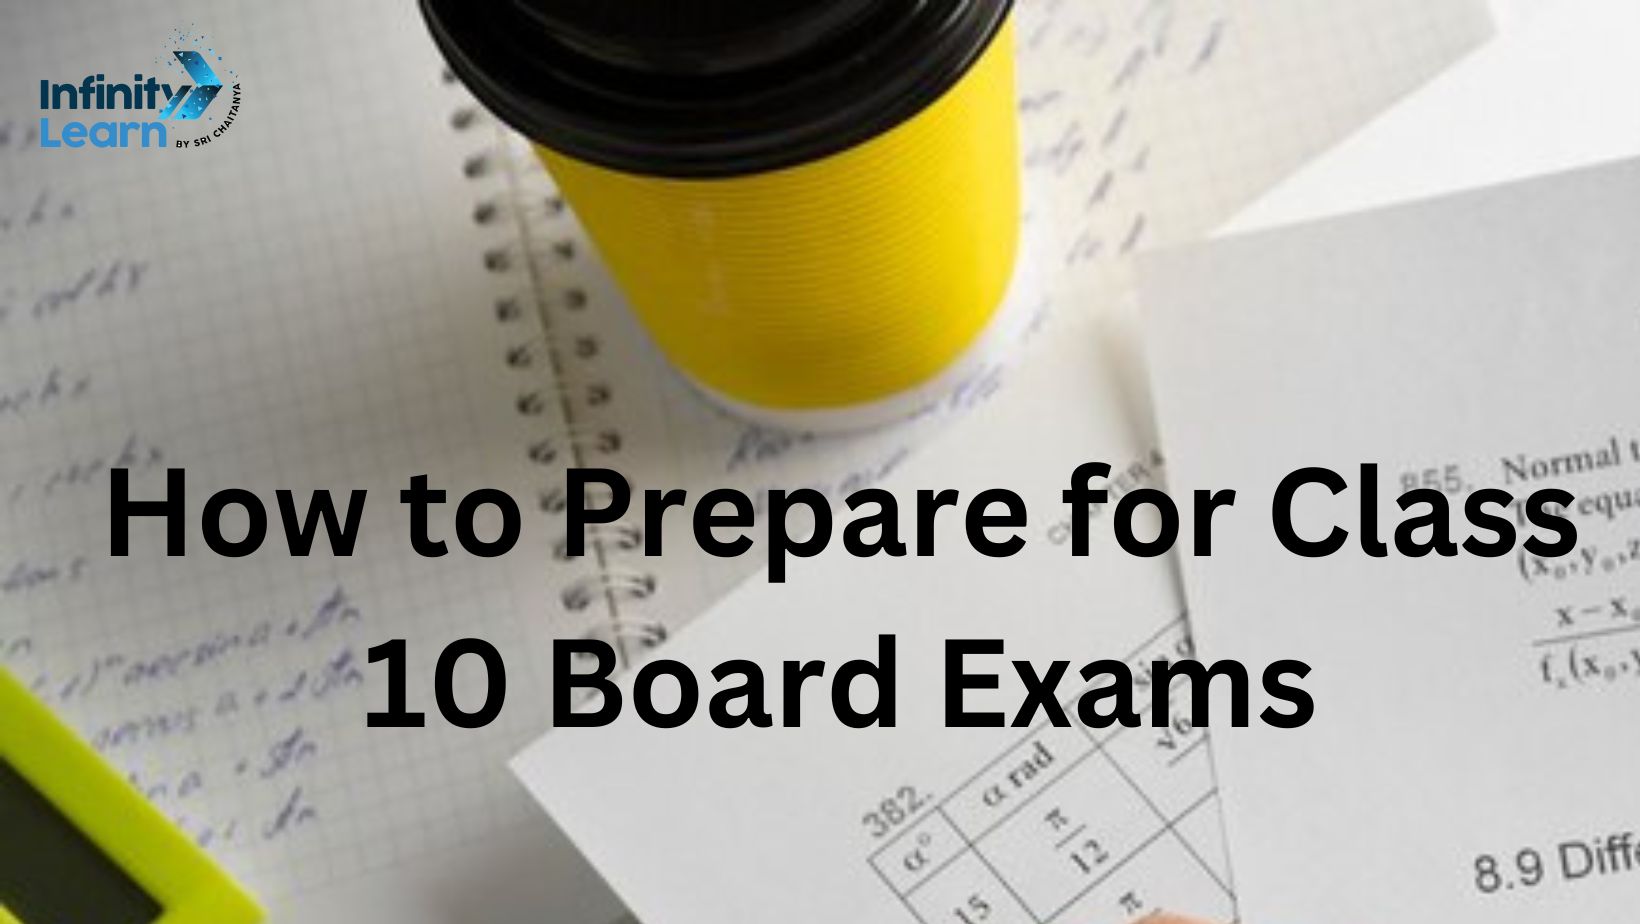 How to Prepare for Board Exams